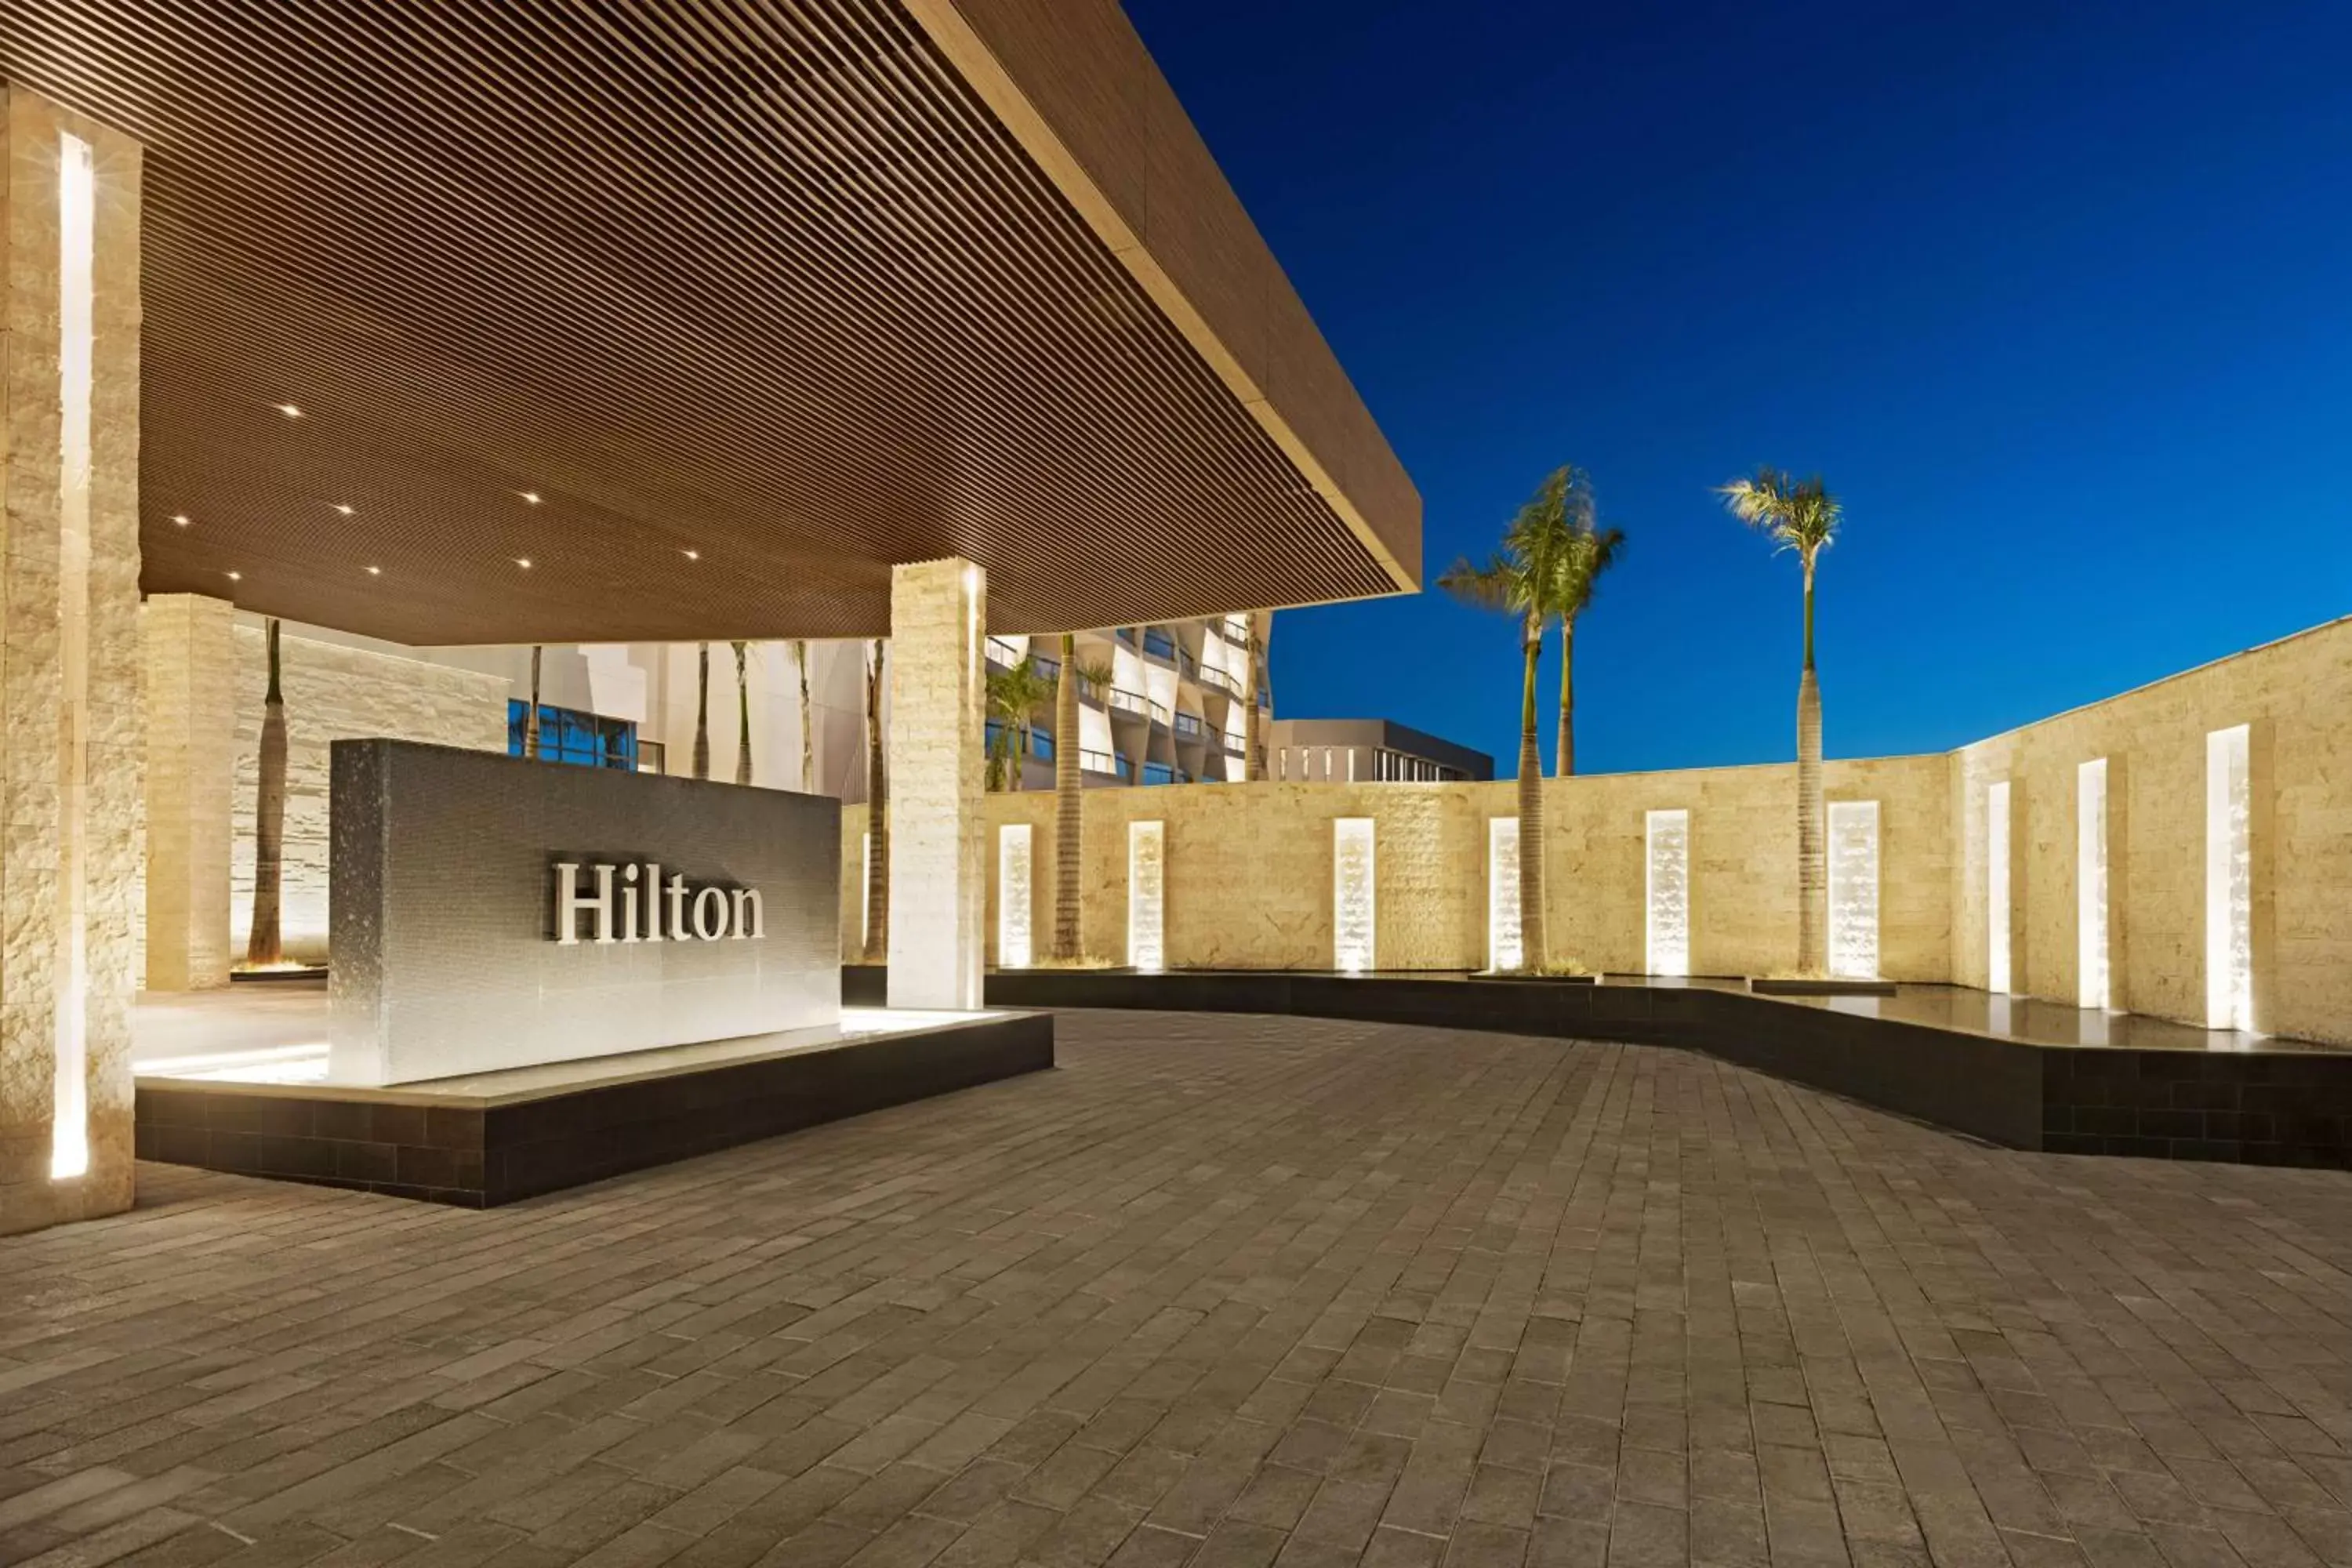 Property building in Hilton Cancun, an All-Inclusive Resort